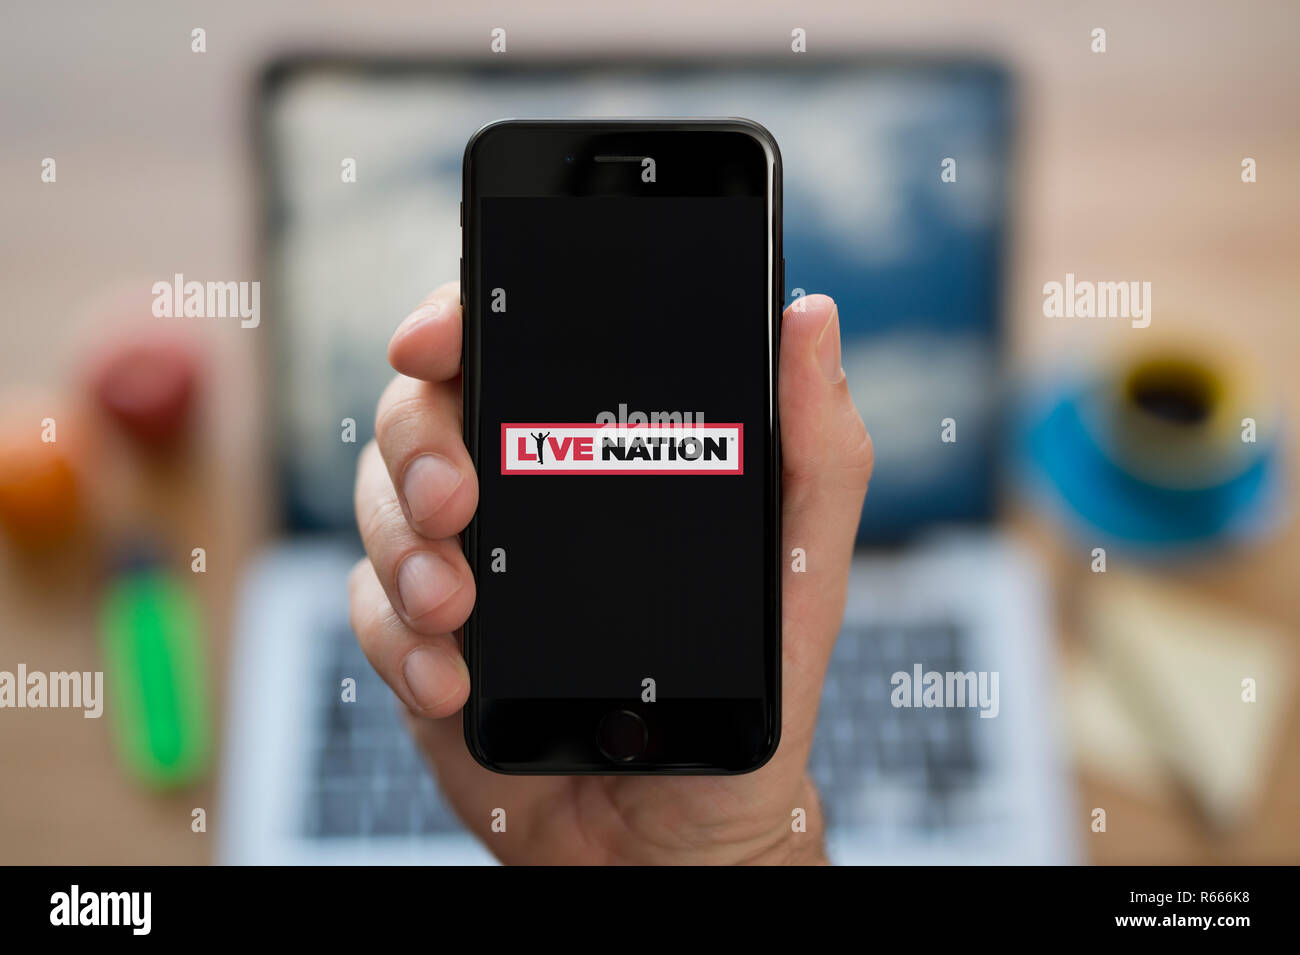 A man looks at his iPhone which displays the Live Nation logo, while sat at his computer desk (Editorial use only). Stock Photo